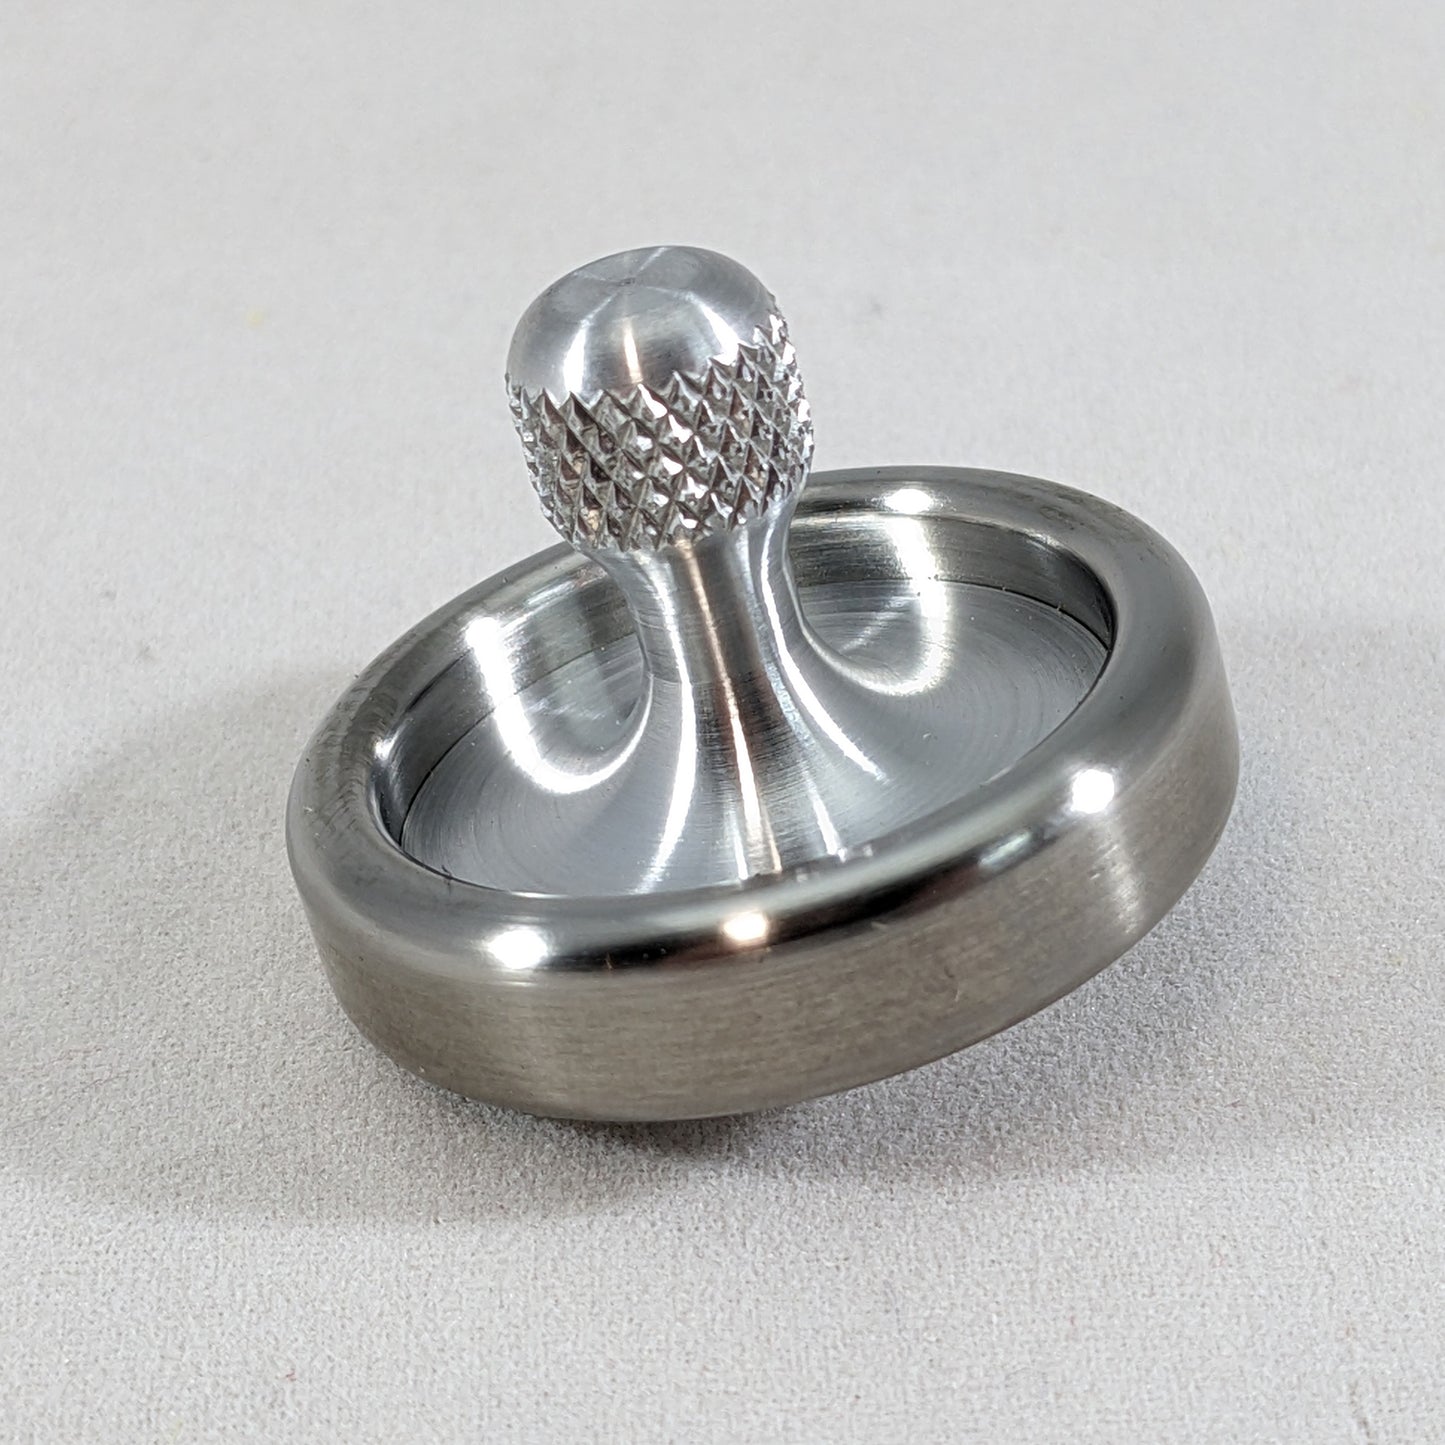 Dynamo - Tungsten & Aluminum Spinning Top w/ Knurled Grip and Ceramic Bearing